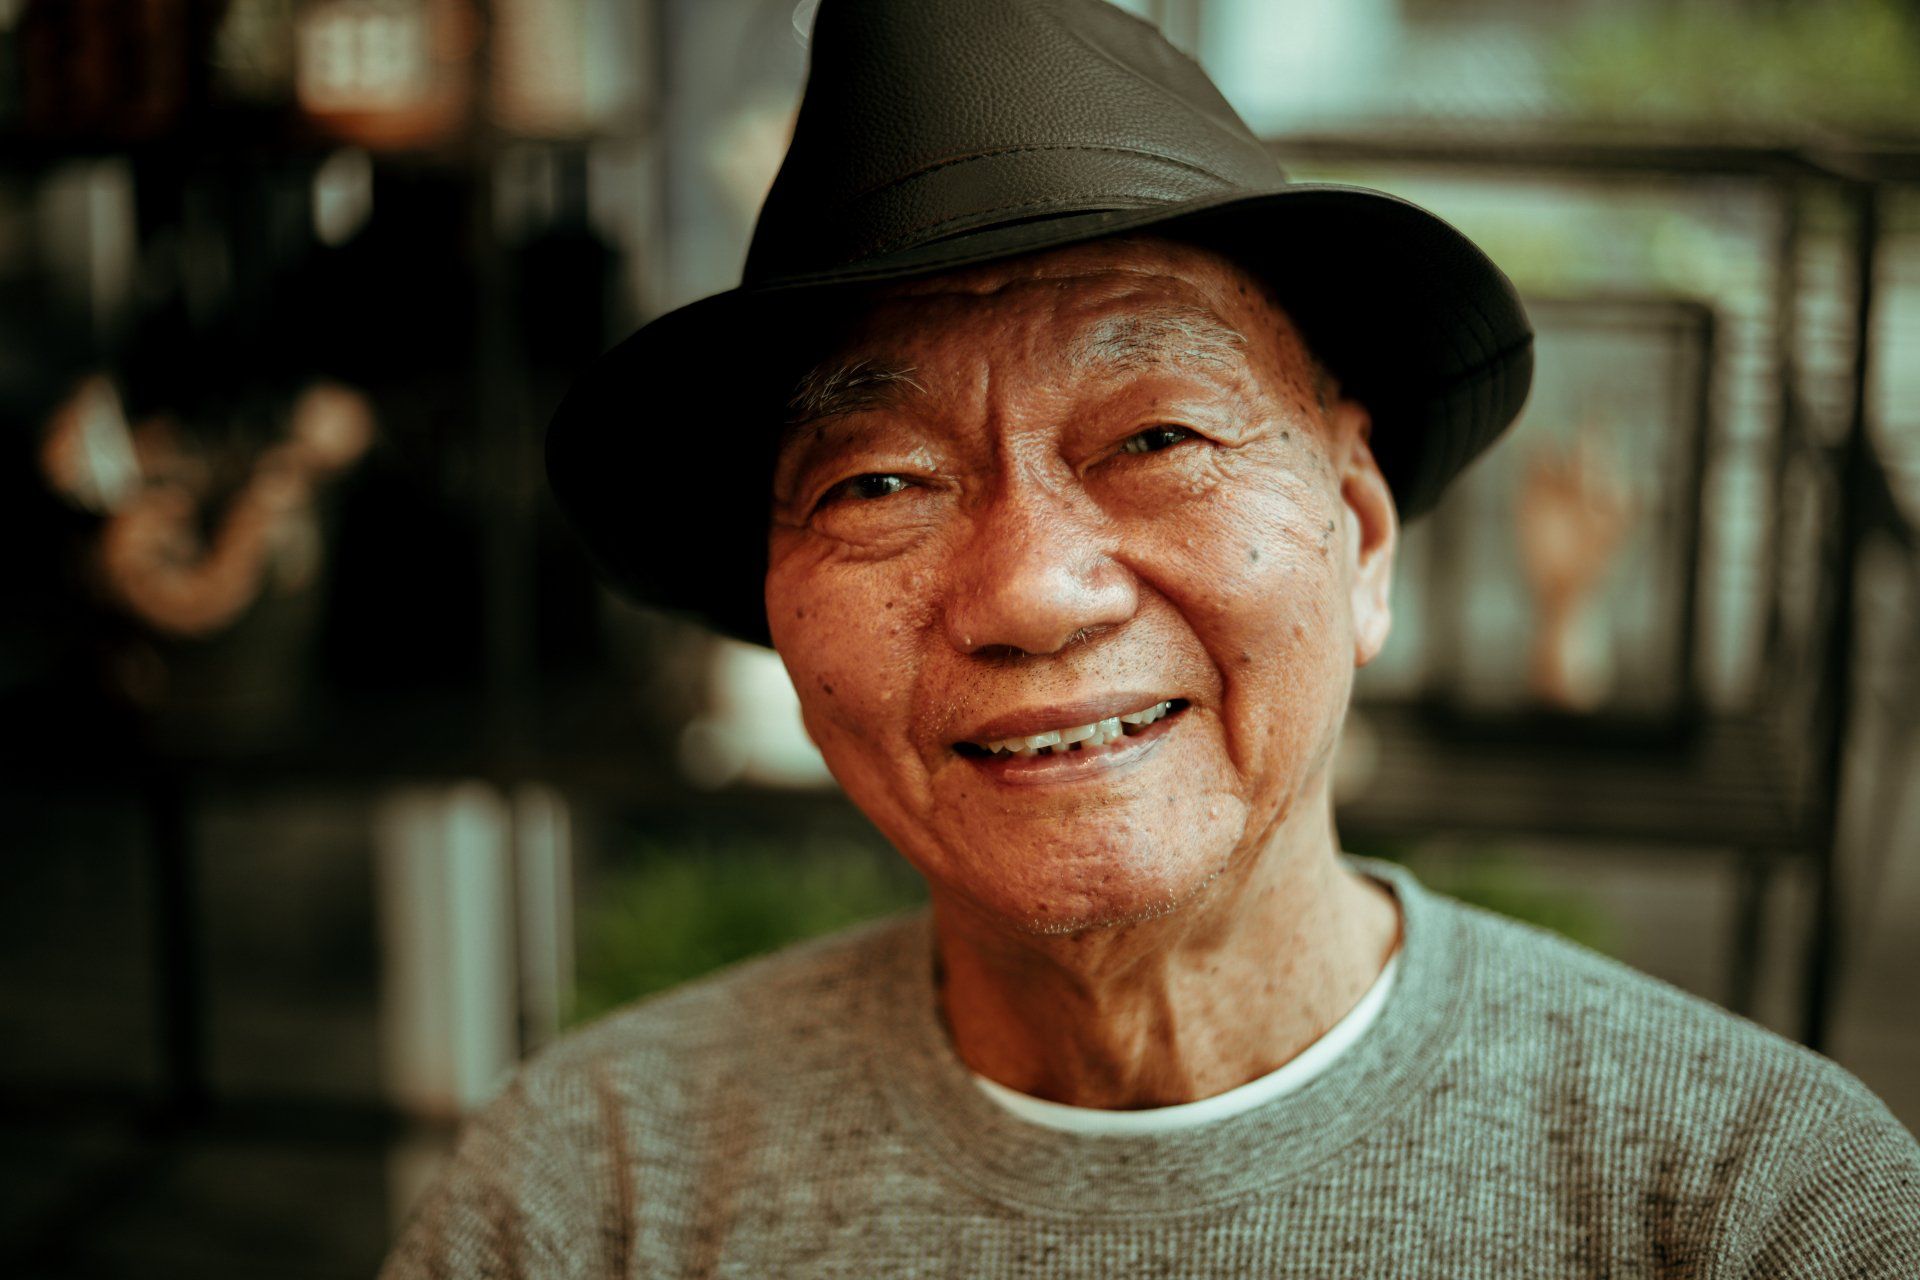 An elderly man wearing a hat and a sweater is smiling for the camera.